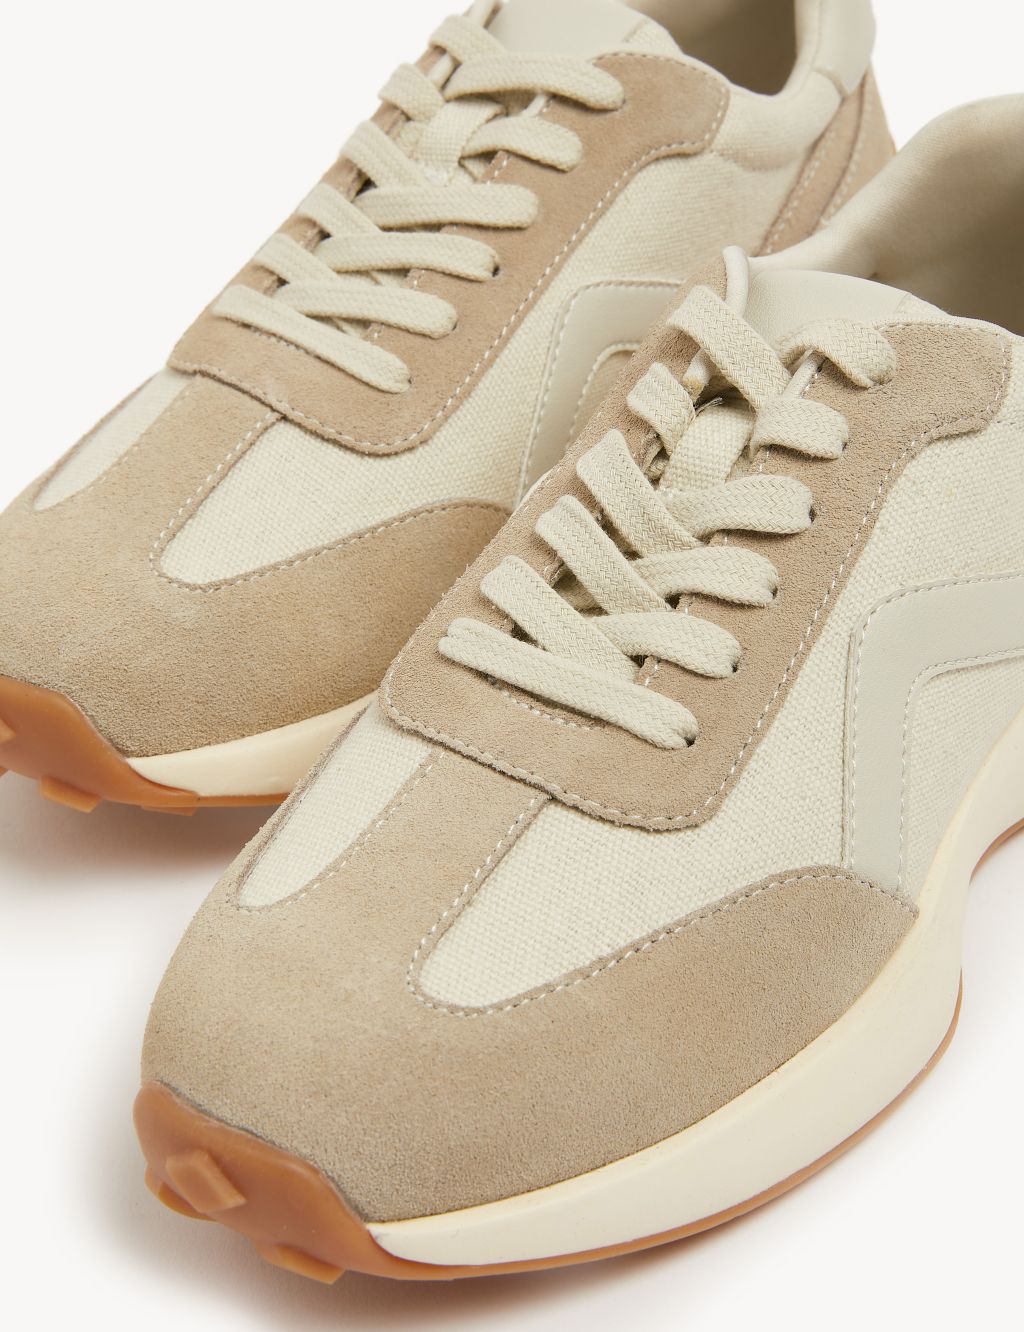 Leather Lace Up Side Detail Trainers image 2